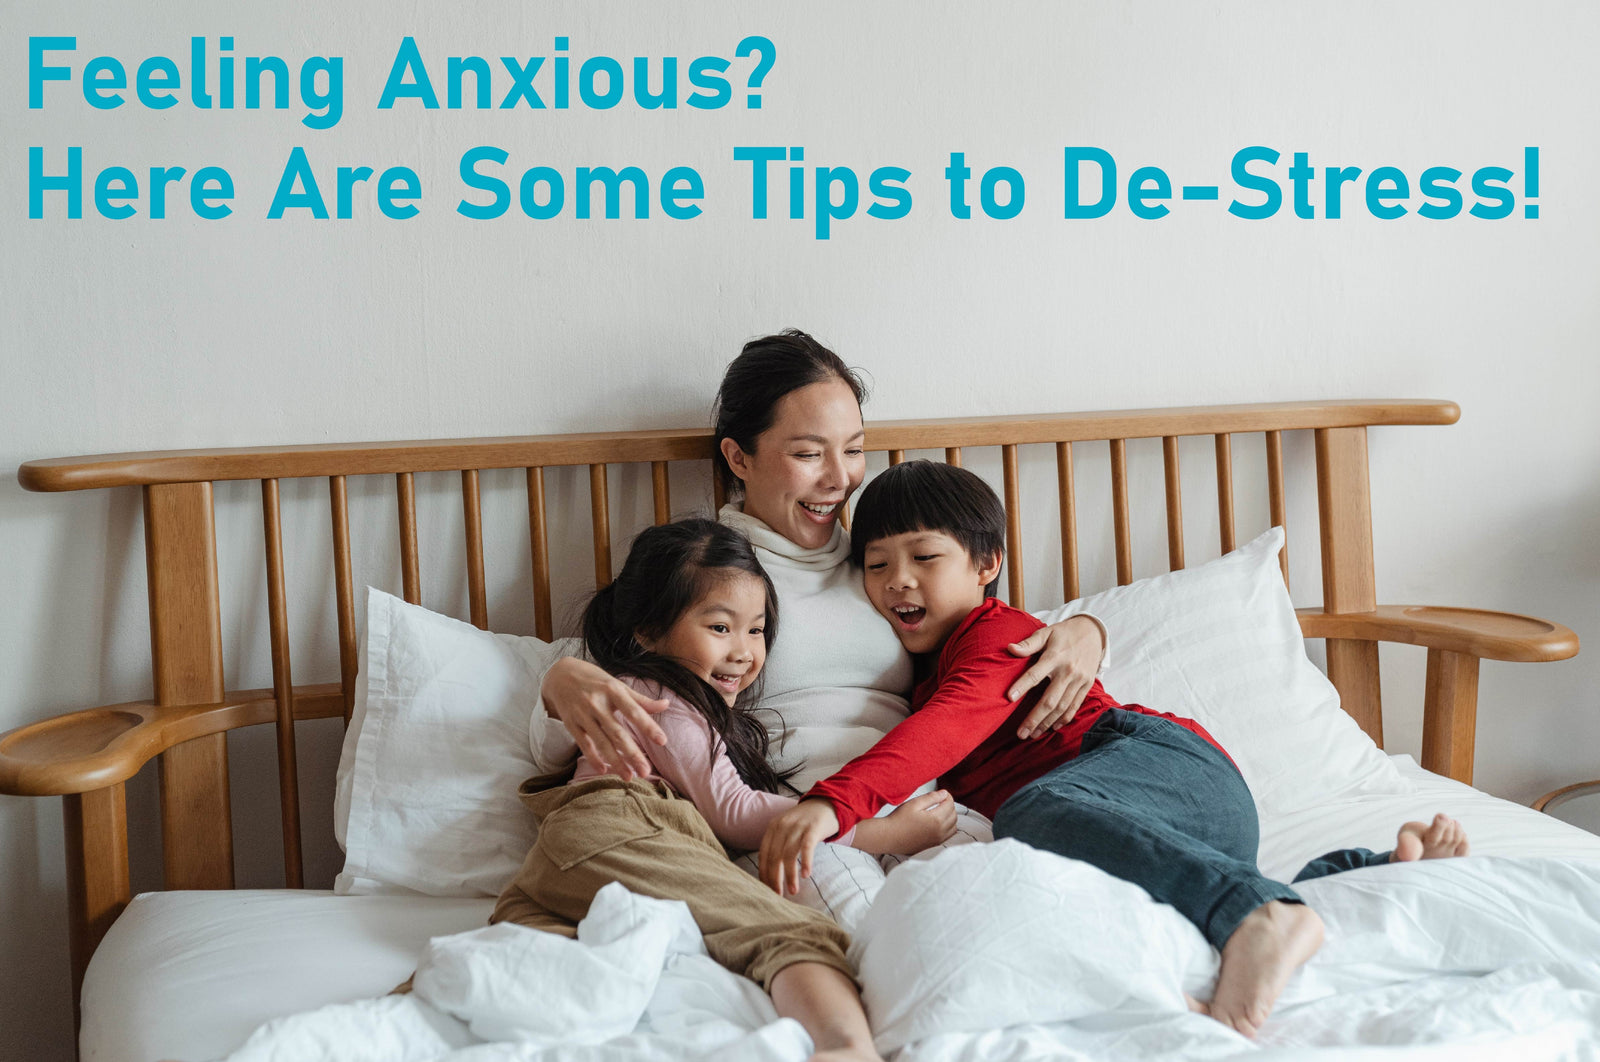 Feeling Anxious about the Holiday Season? Here are 9 Tips for Moms to De-Stress!